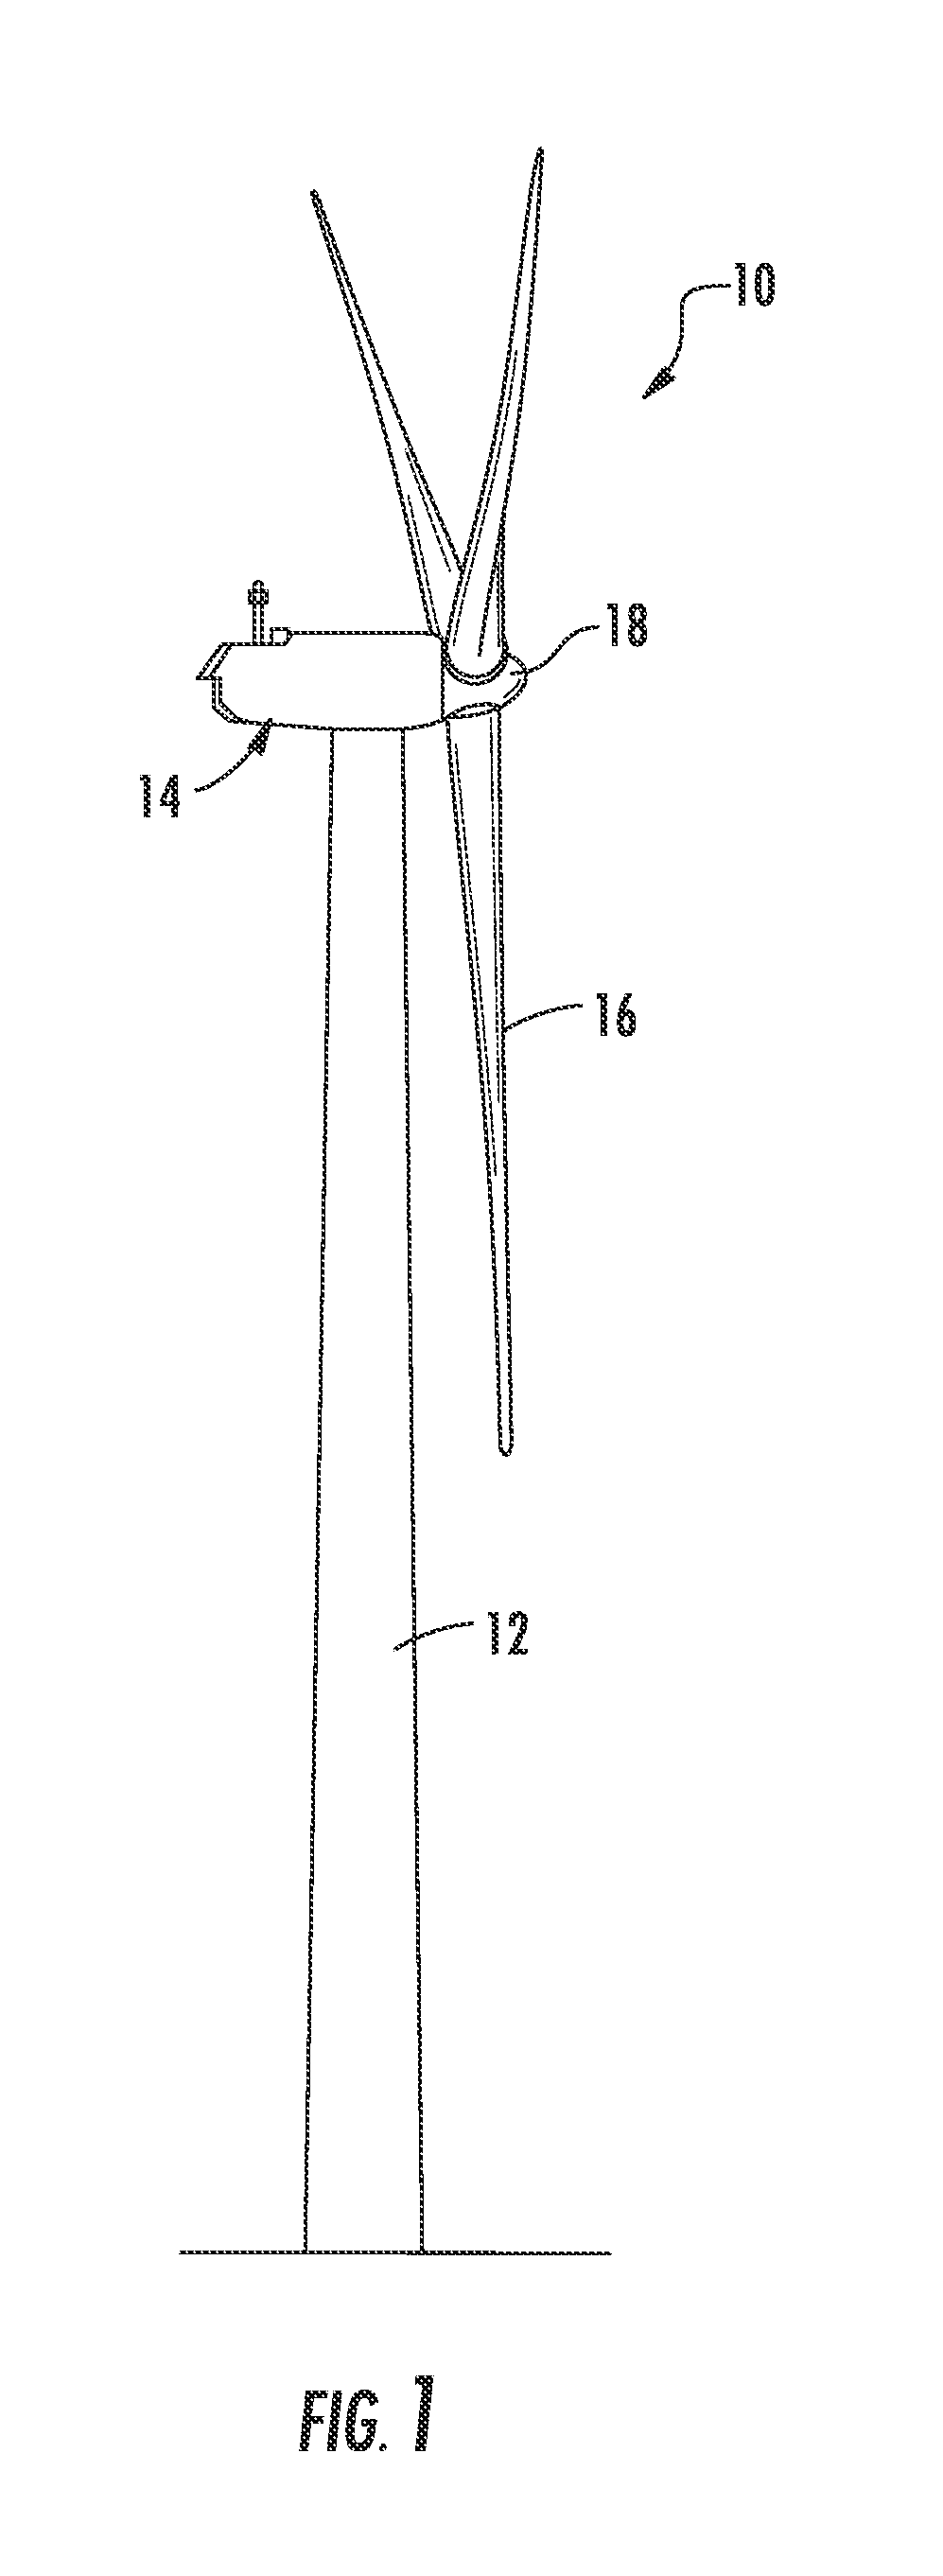 Composite layers for bonding components of a wind turbine rotor blade